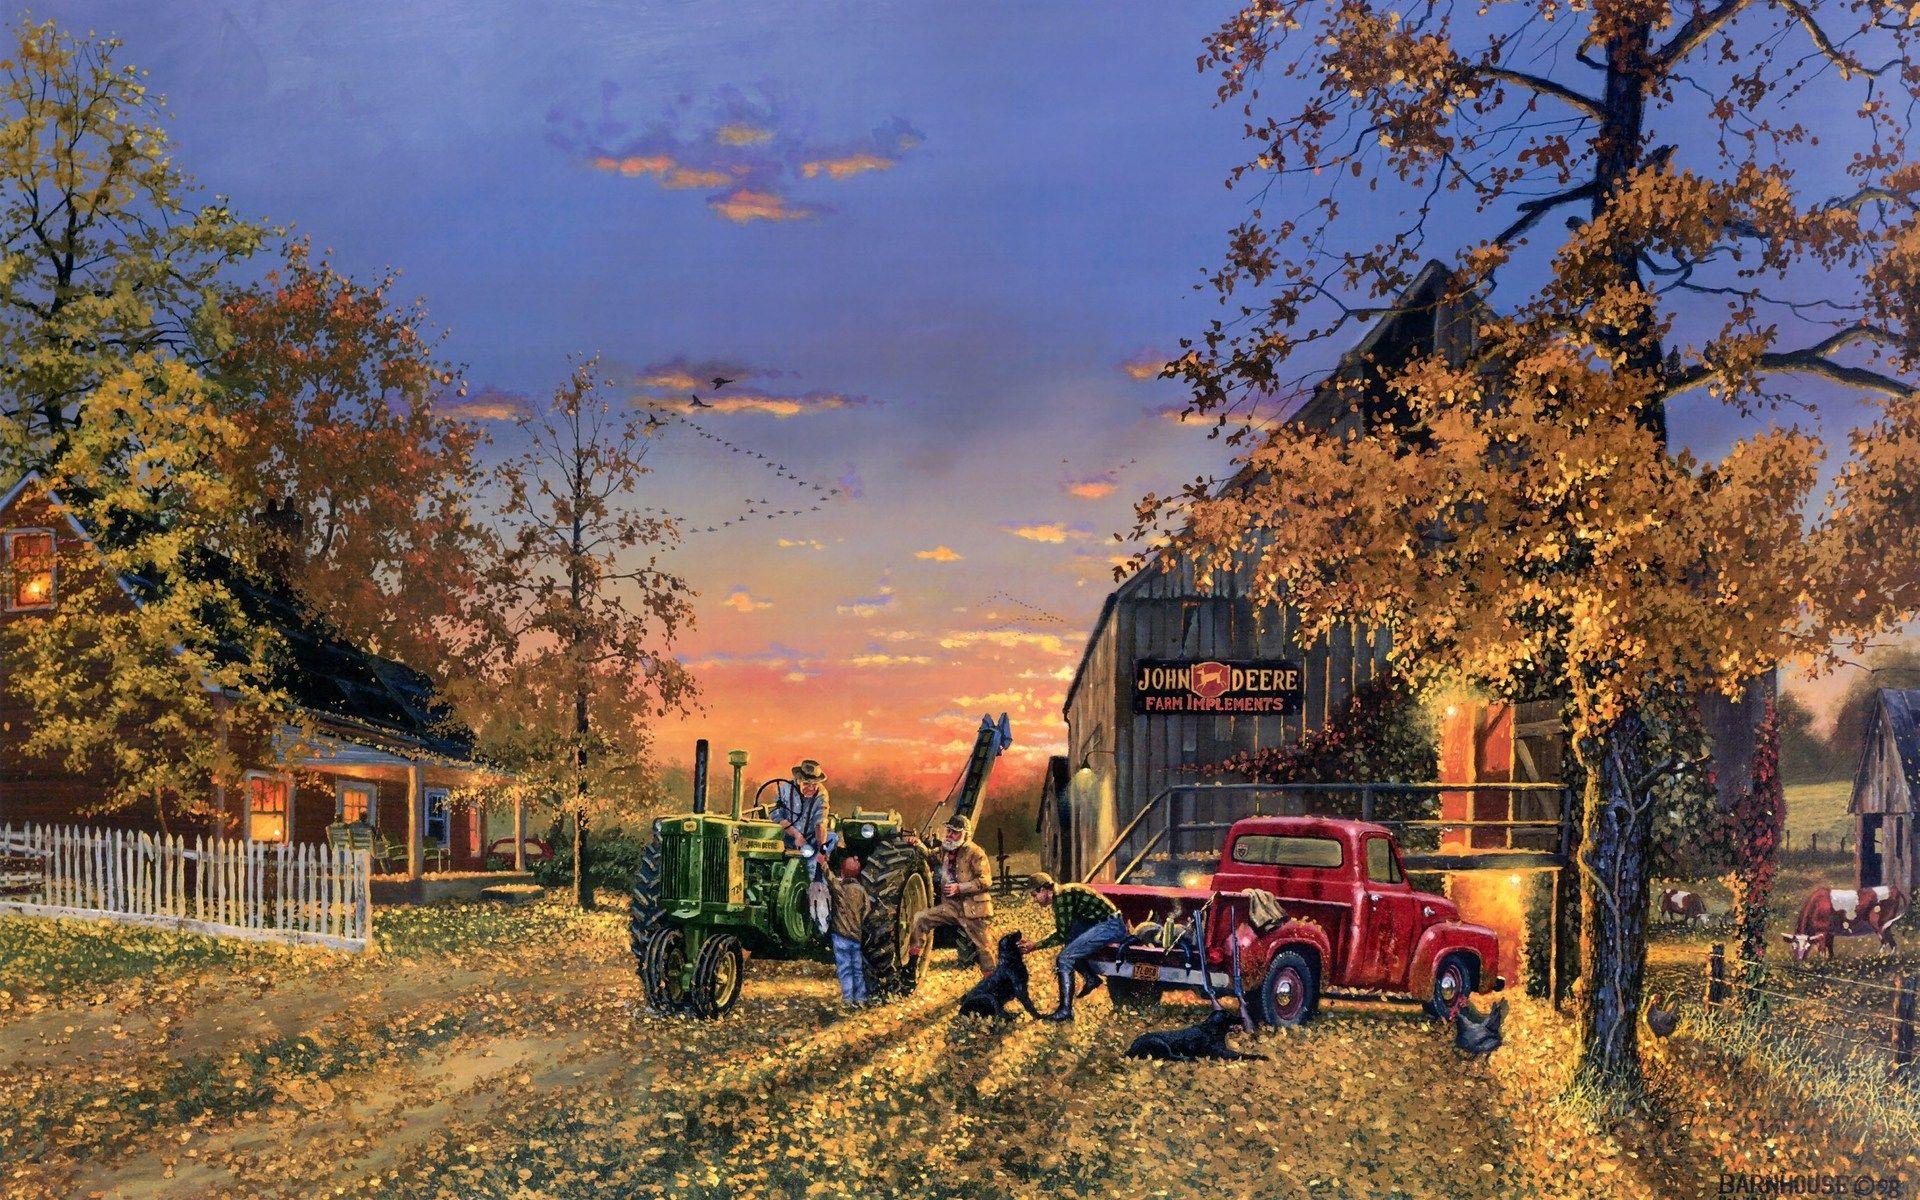 Dave Barnhouse Barnhouse Paintings Country Artistic Farm Vehicles Tractor People Landscapes Autumn Fall Seasons H. Scenery Paintings, Farm Paintings, Farm Scenery